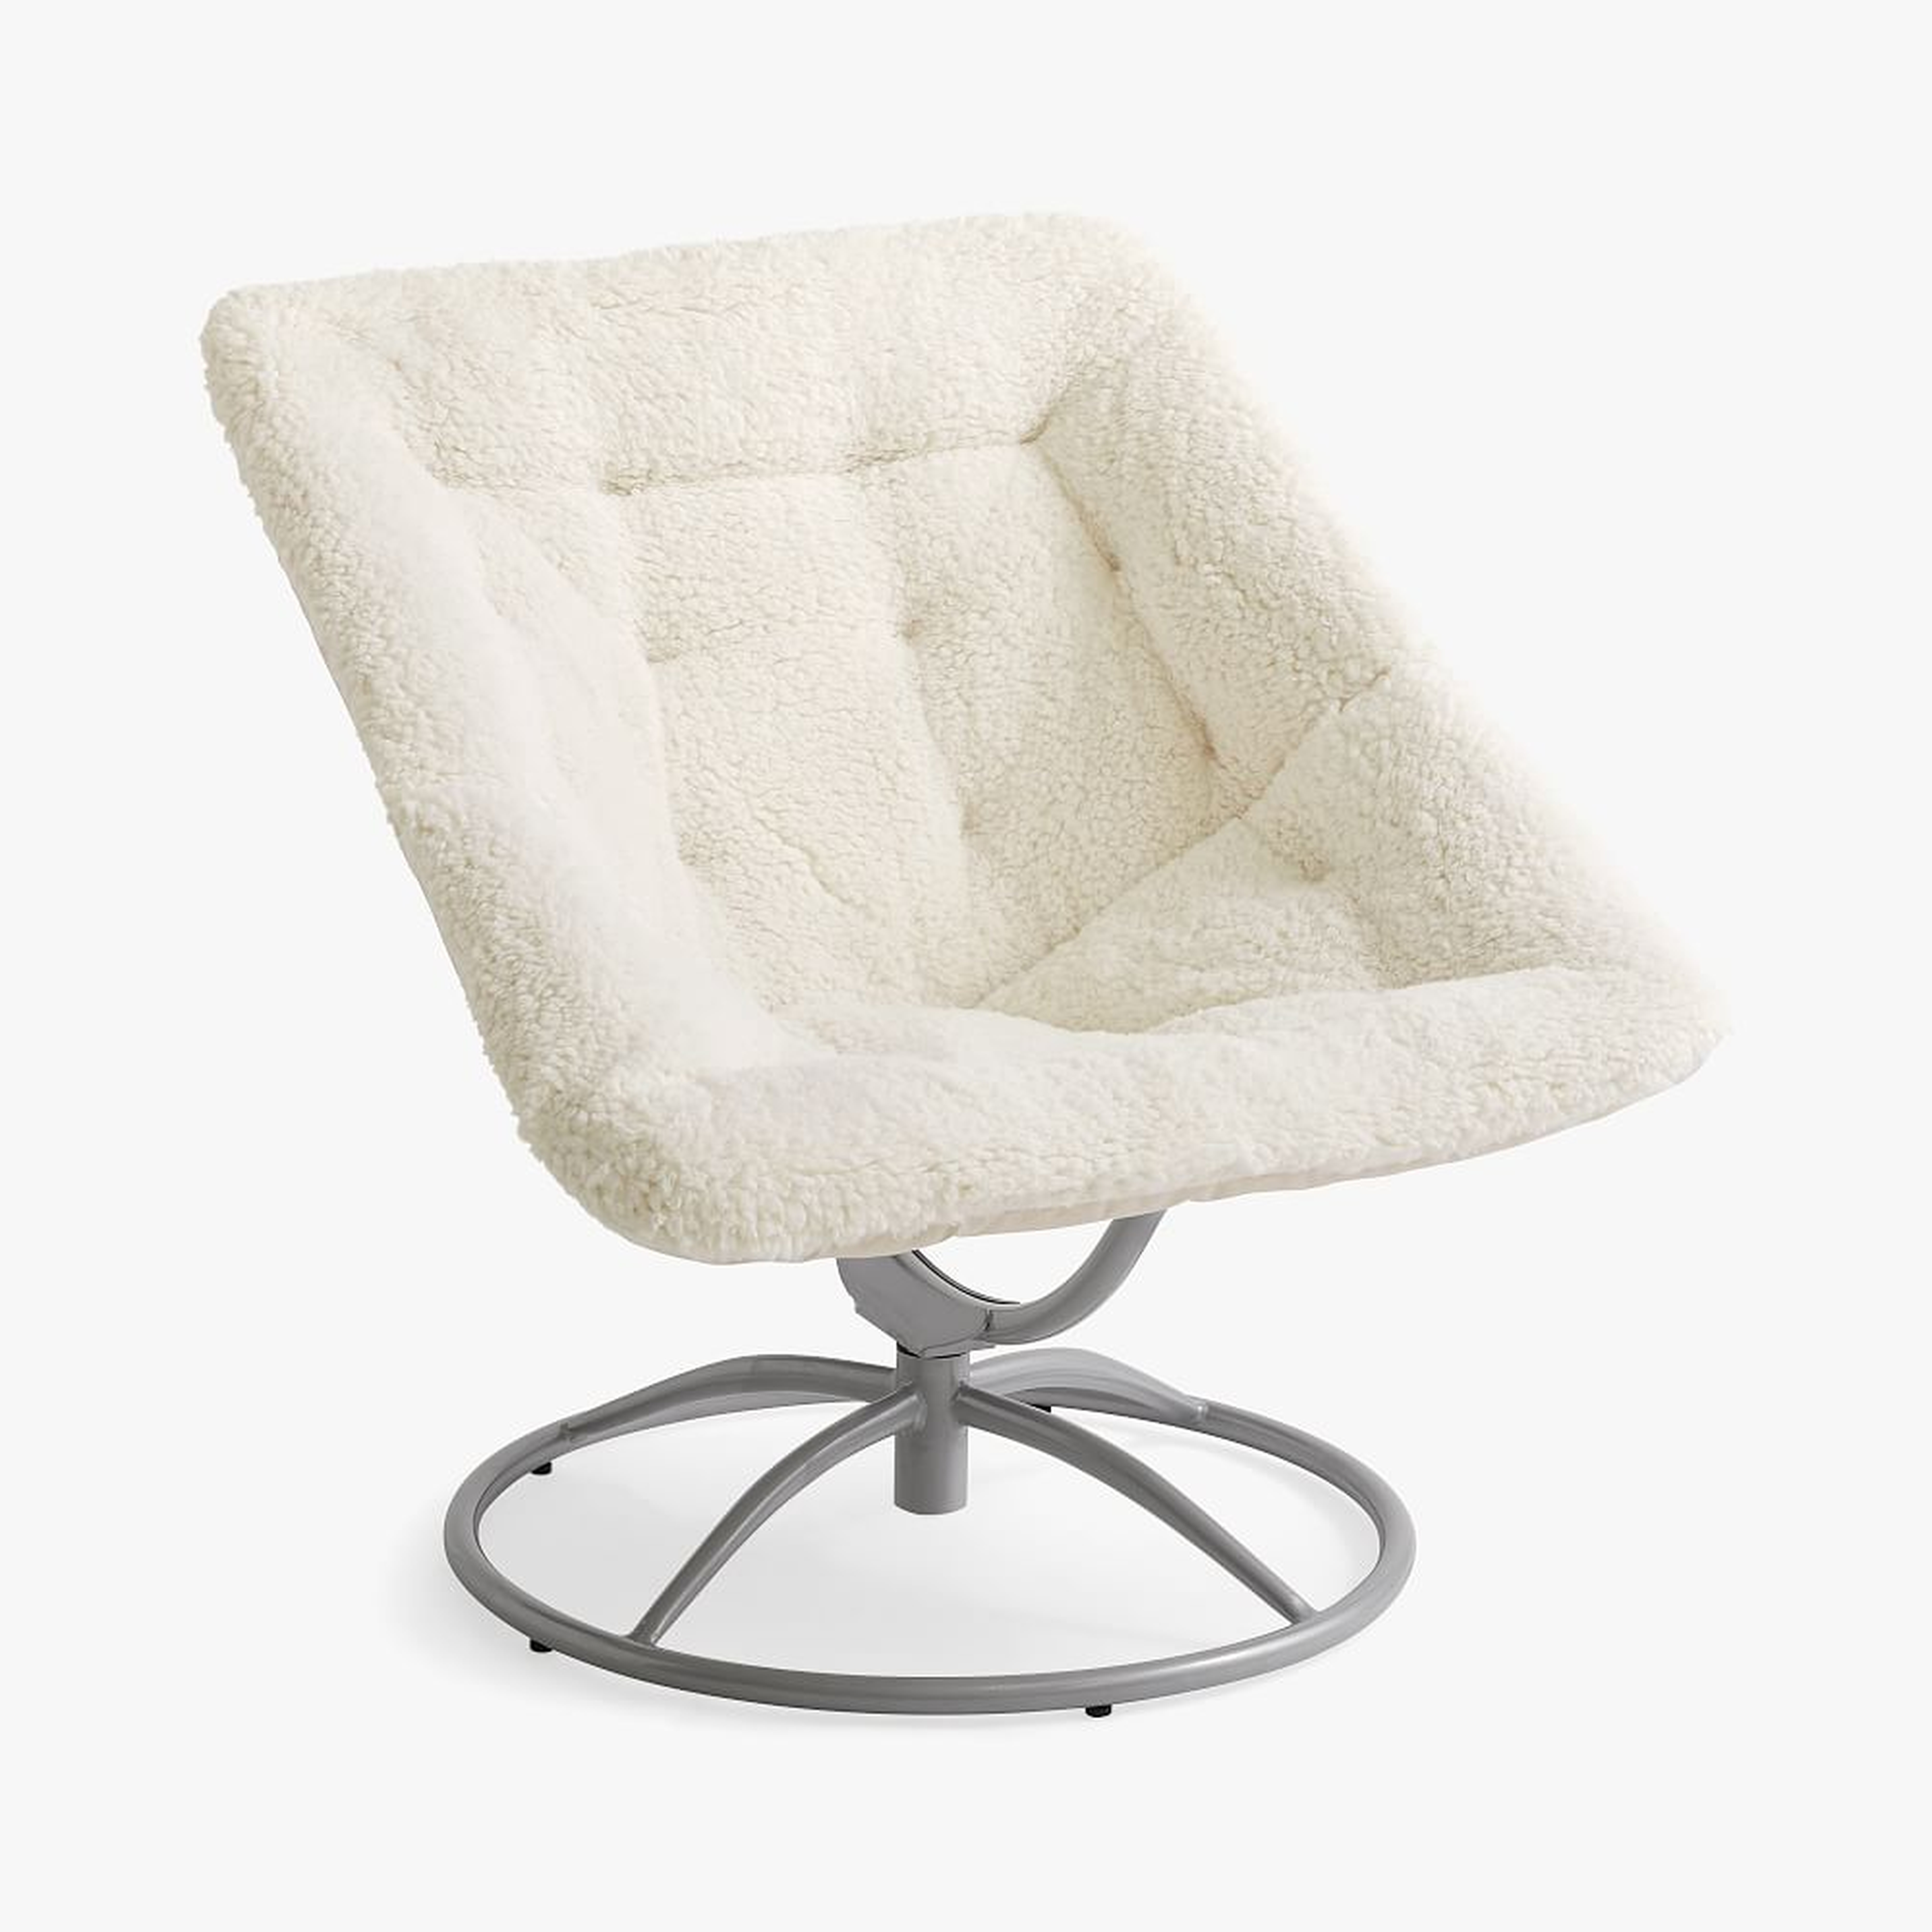 Sherpa Ivory/White Square Hang-A-Round Swivel Chair - Pottery Barn Teen